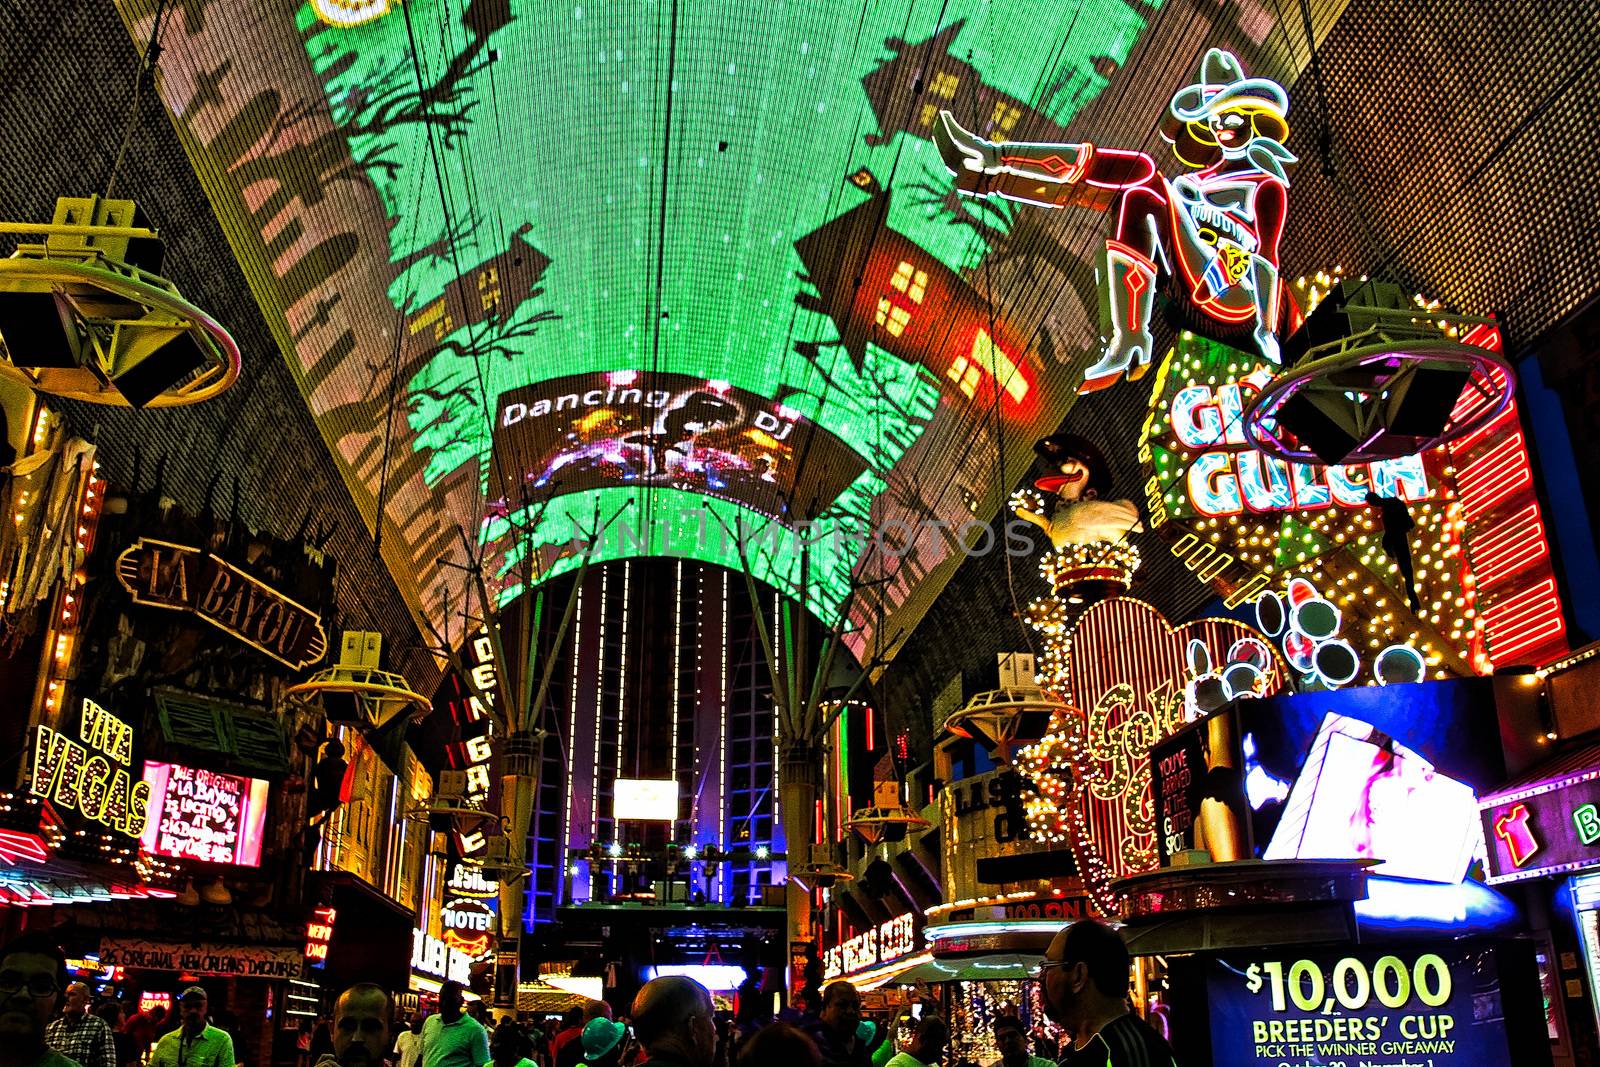 Las Vegas,NV/USA - Sep 12,2018 : The Fremont Street Experience in Las Vegas, Nevada. The Fremont Street Experience is a pedestrian mall and attraction in downtown Las Vegas. by USA-TARO